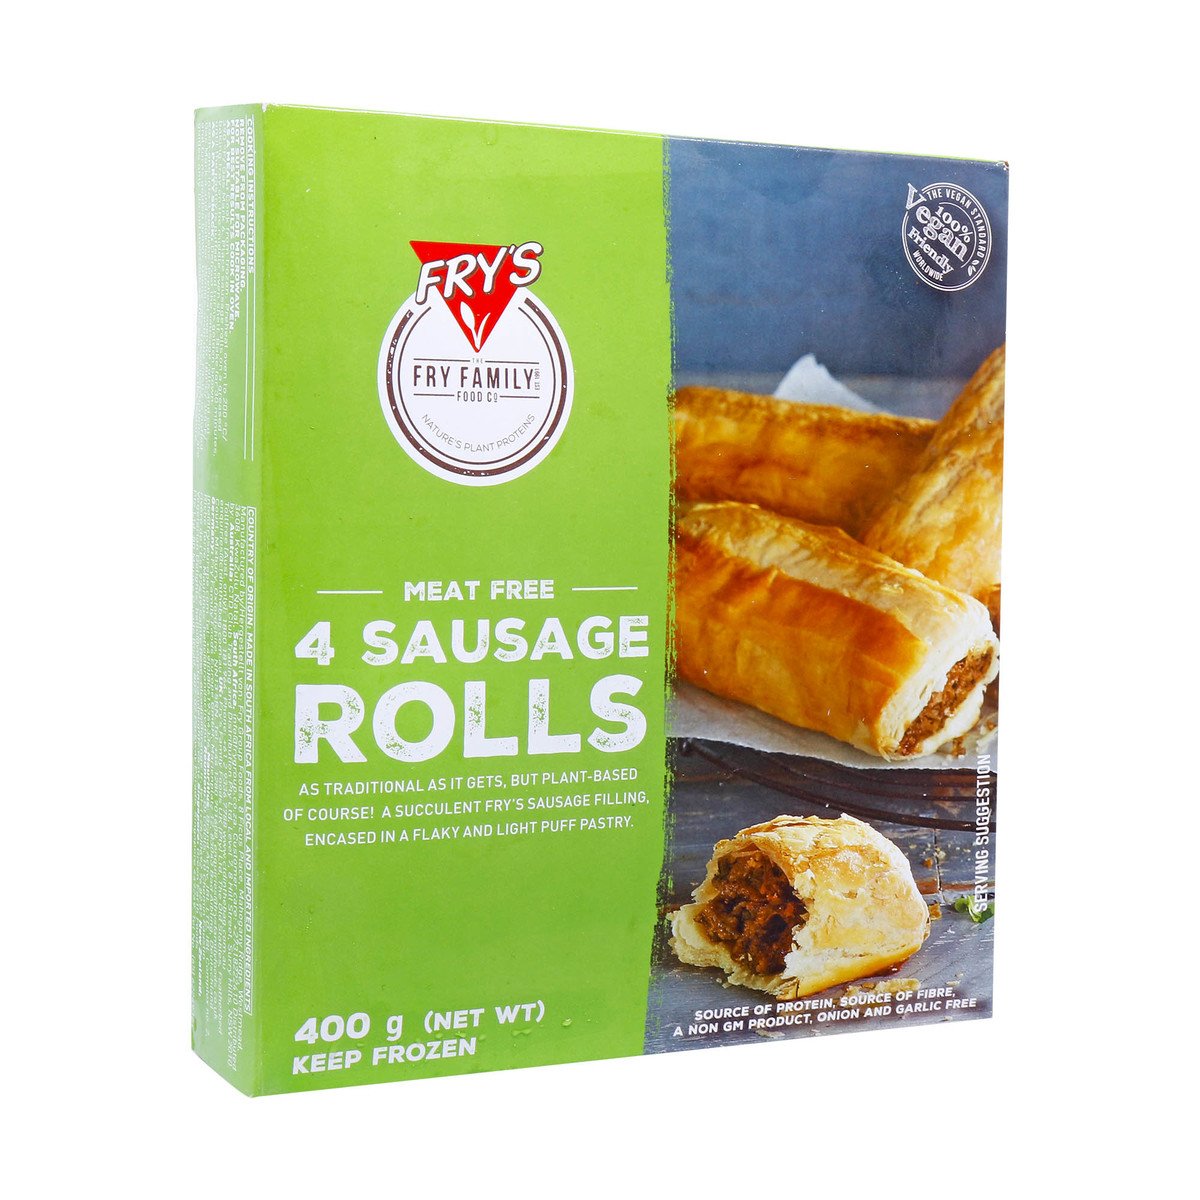 Fry's Family Meat Free 4 Sausage Rolls 400 g